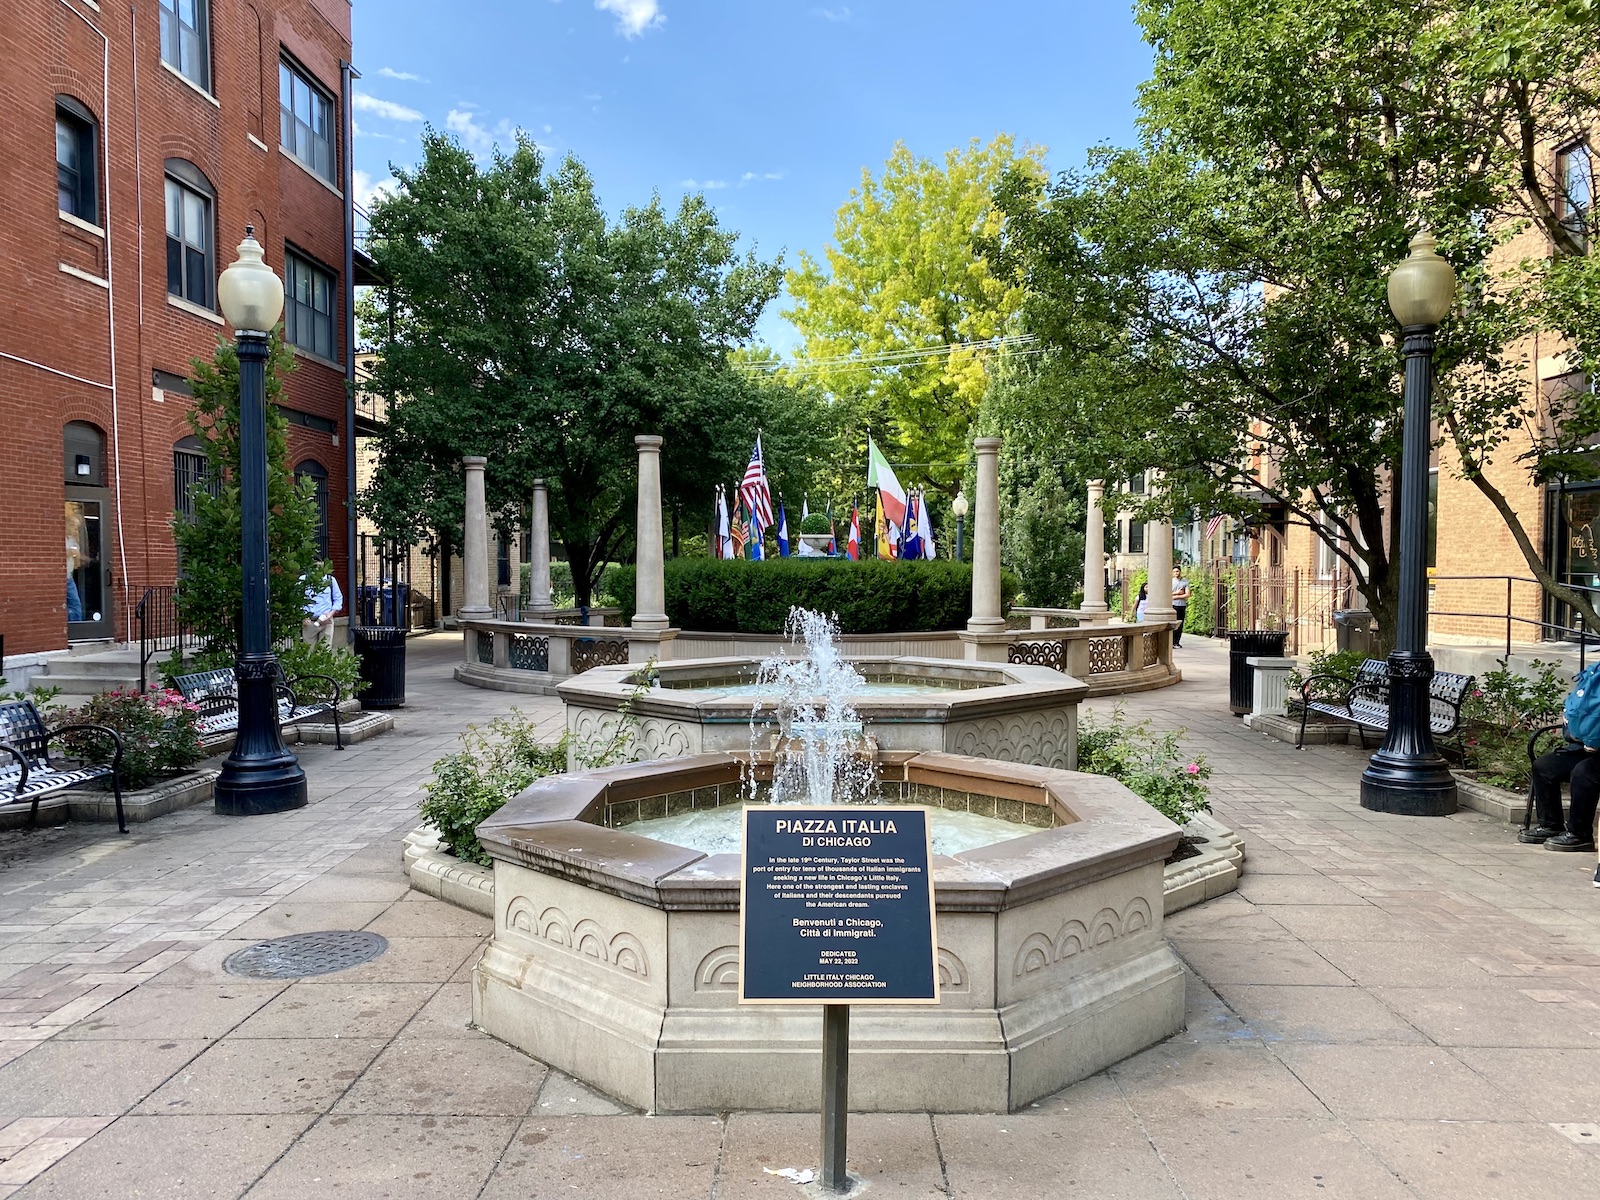 A plaque stands in front of the fountains at Piazza Italia Di Chicago, flags in the distance surround the fountains in the distance.